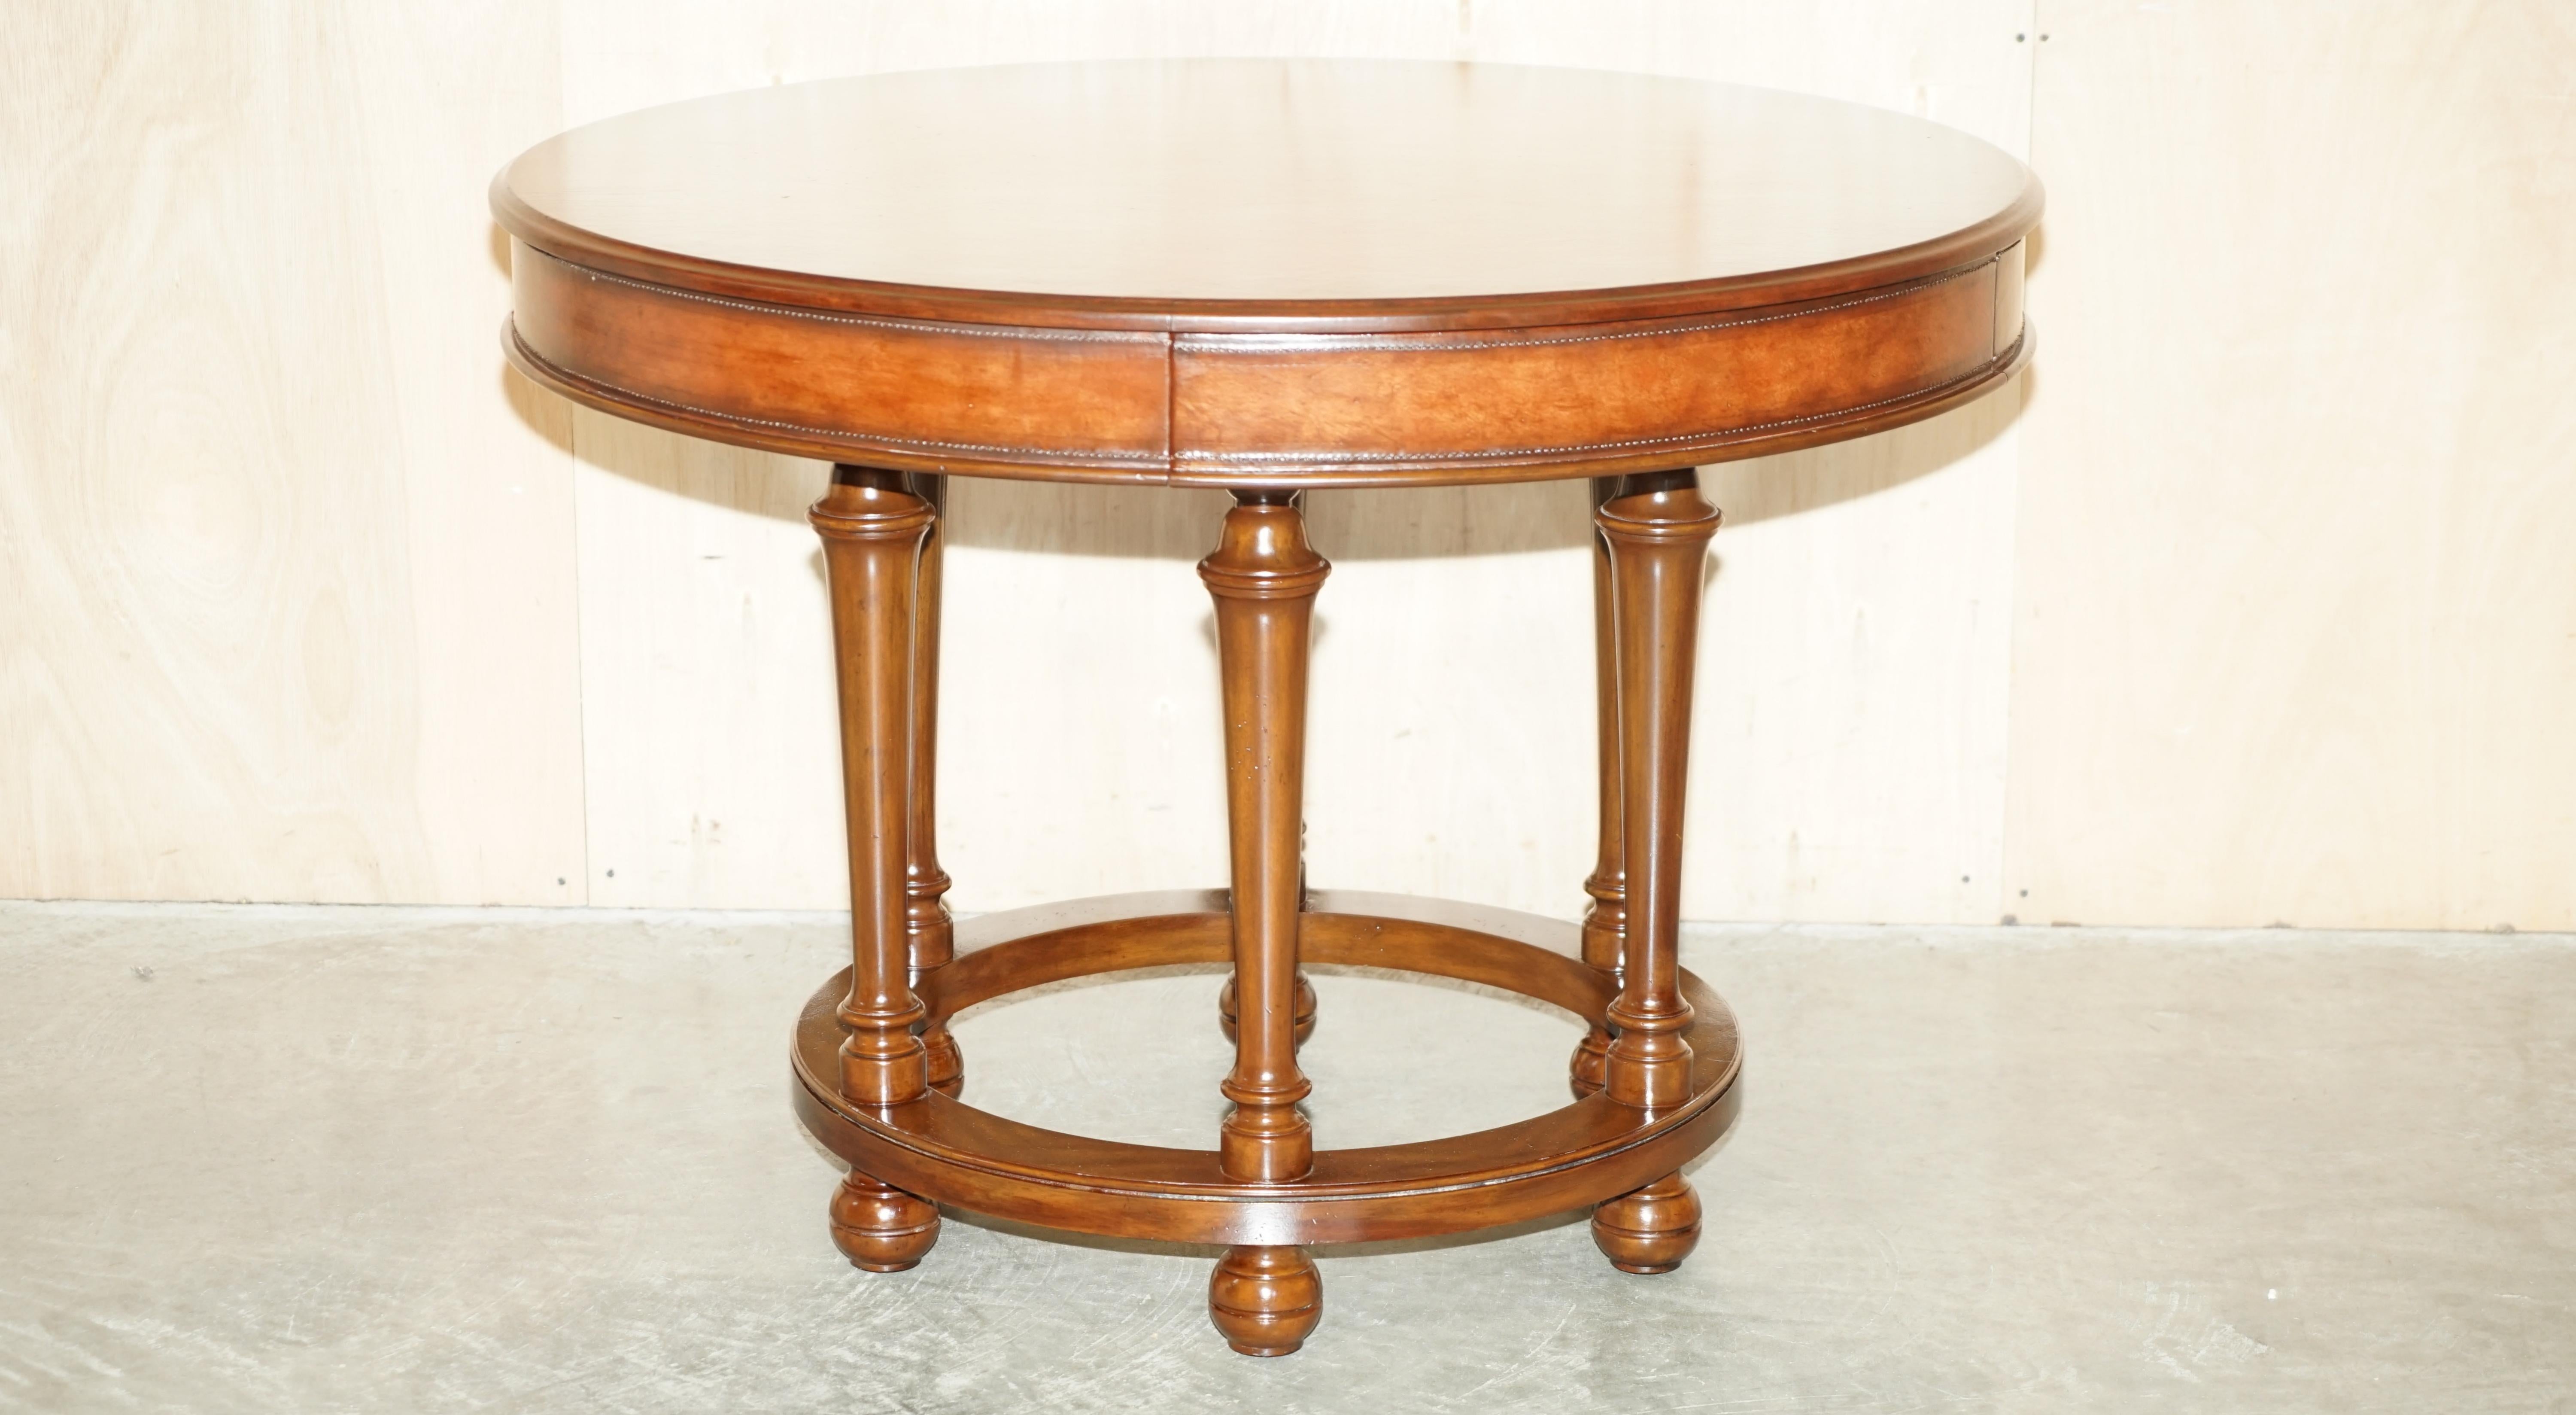 We are delighted to offer for sale this very nice and well made RRP £11,000 Ralph Lauren centre table with hand stitched brown leather sides which is one of a pair

This sale is for one table, I have an exacting matching table listed under my